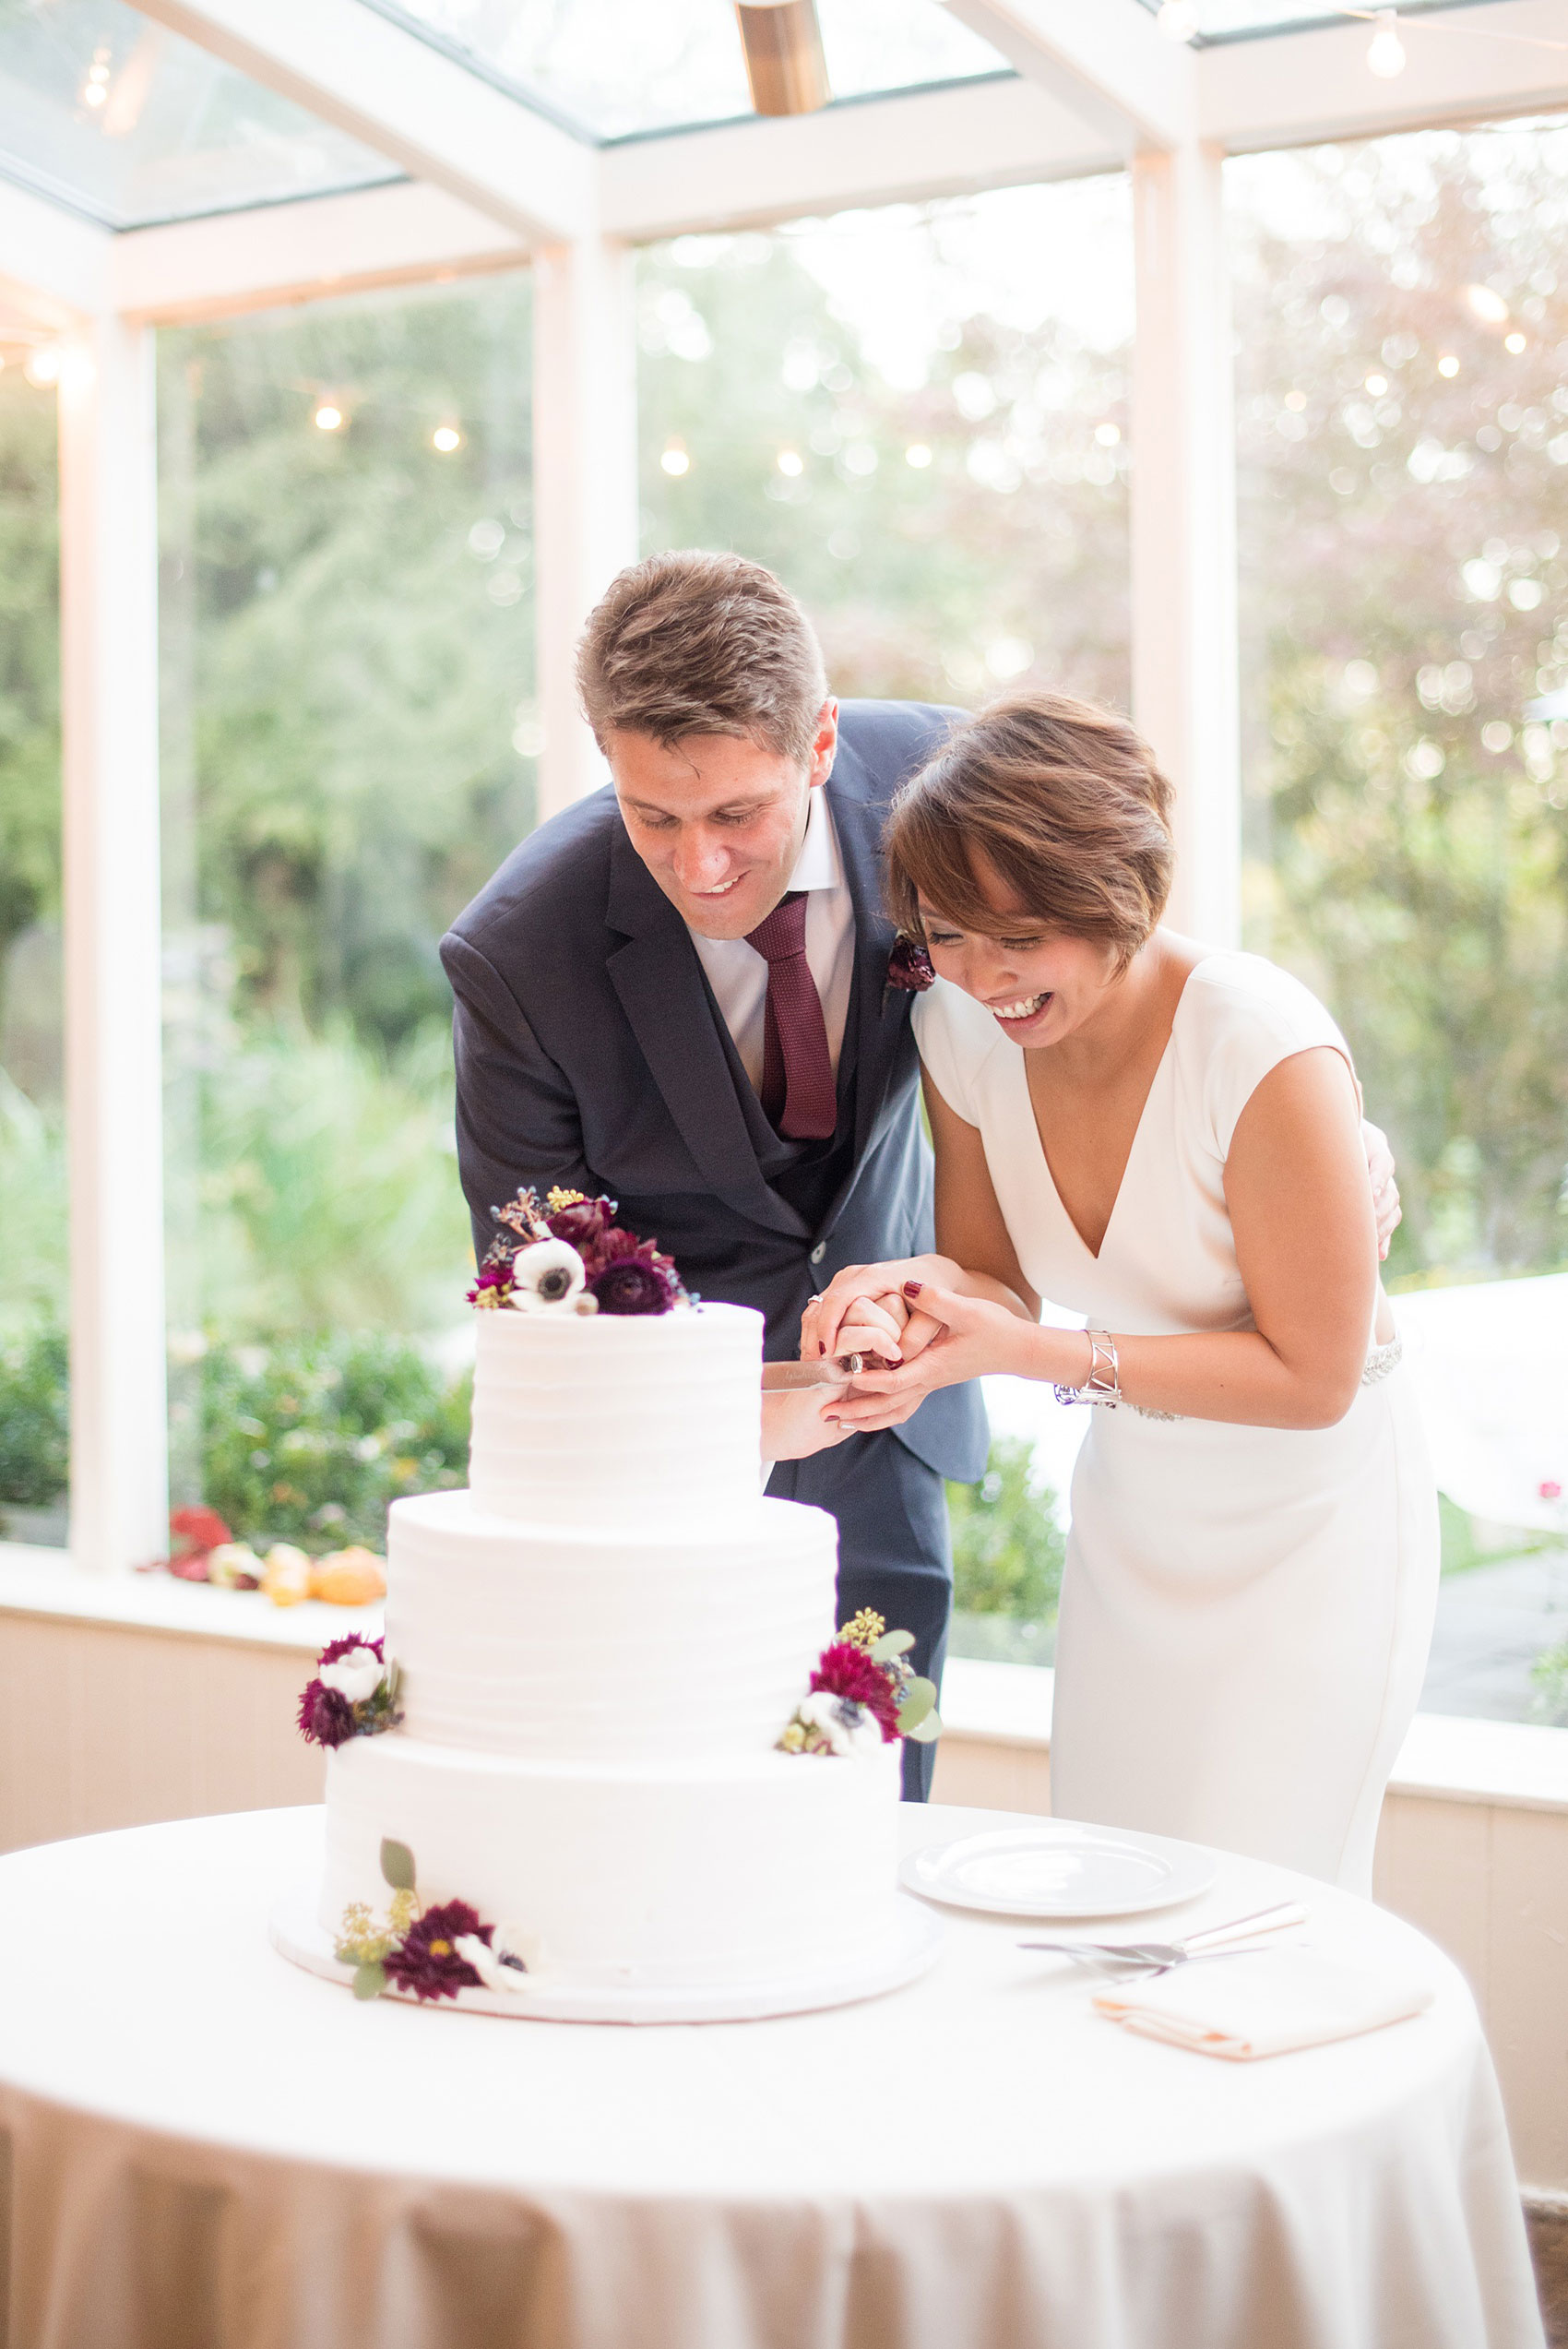 Mikkel Paige Photography photos of a wedding at Crabtree's Kittle House in Chappaqua, New York. Photo of the bride and groom cutting their white buttercream cake.